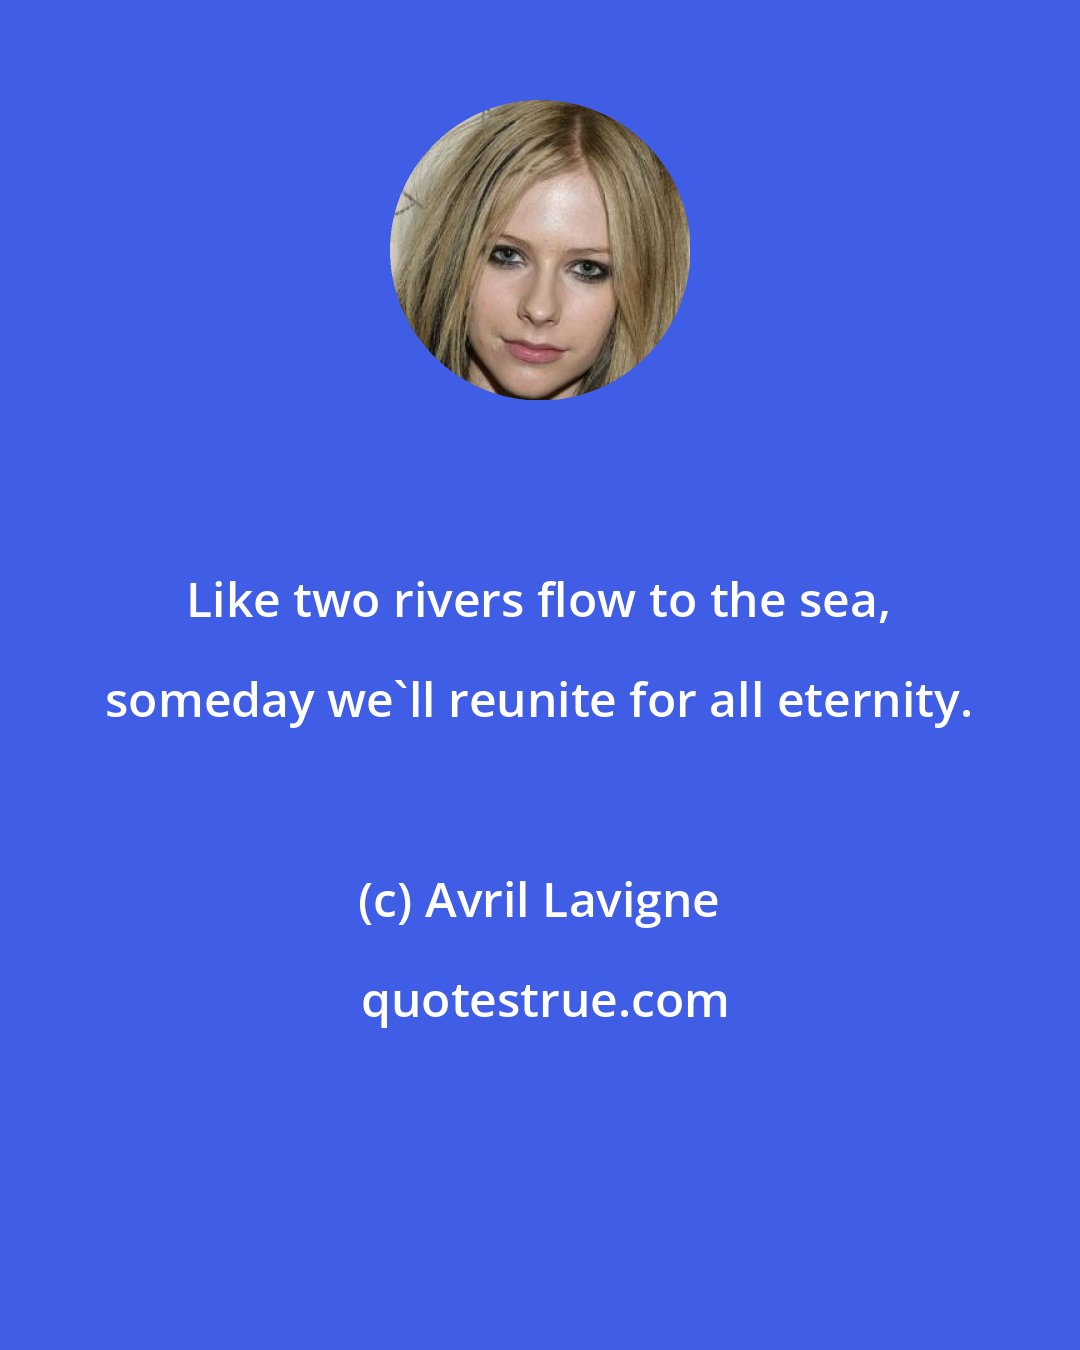 Avril Lavigne: Like two rivers flow to the sea, someday we'll reunite for all eternity.